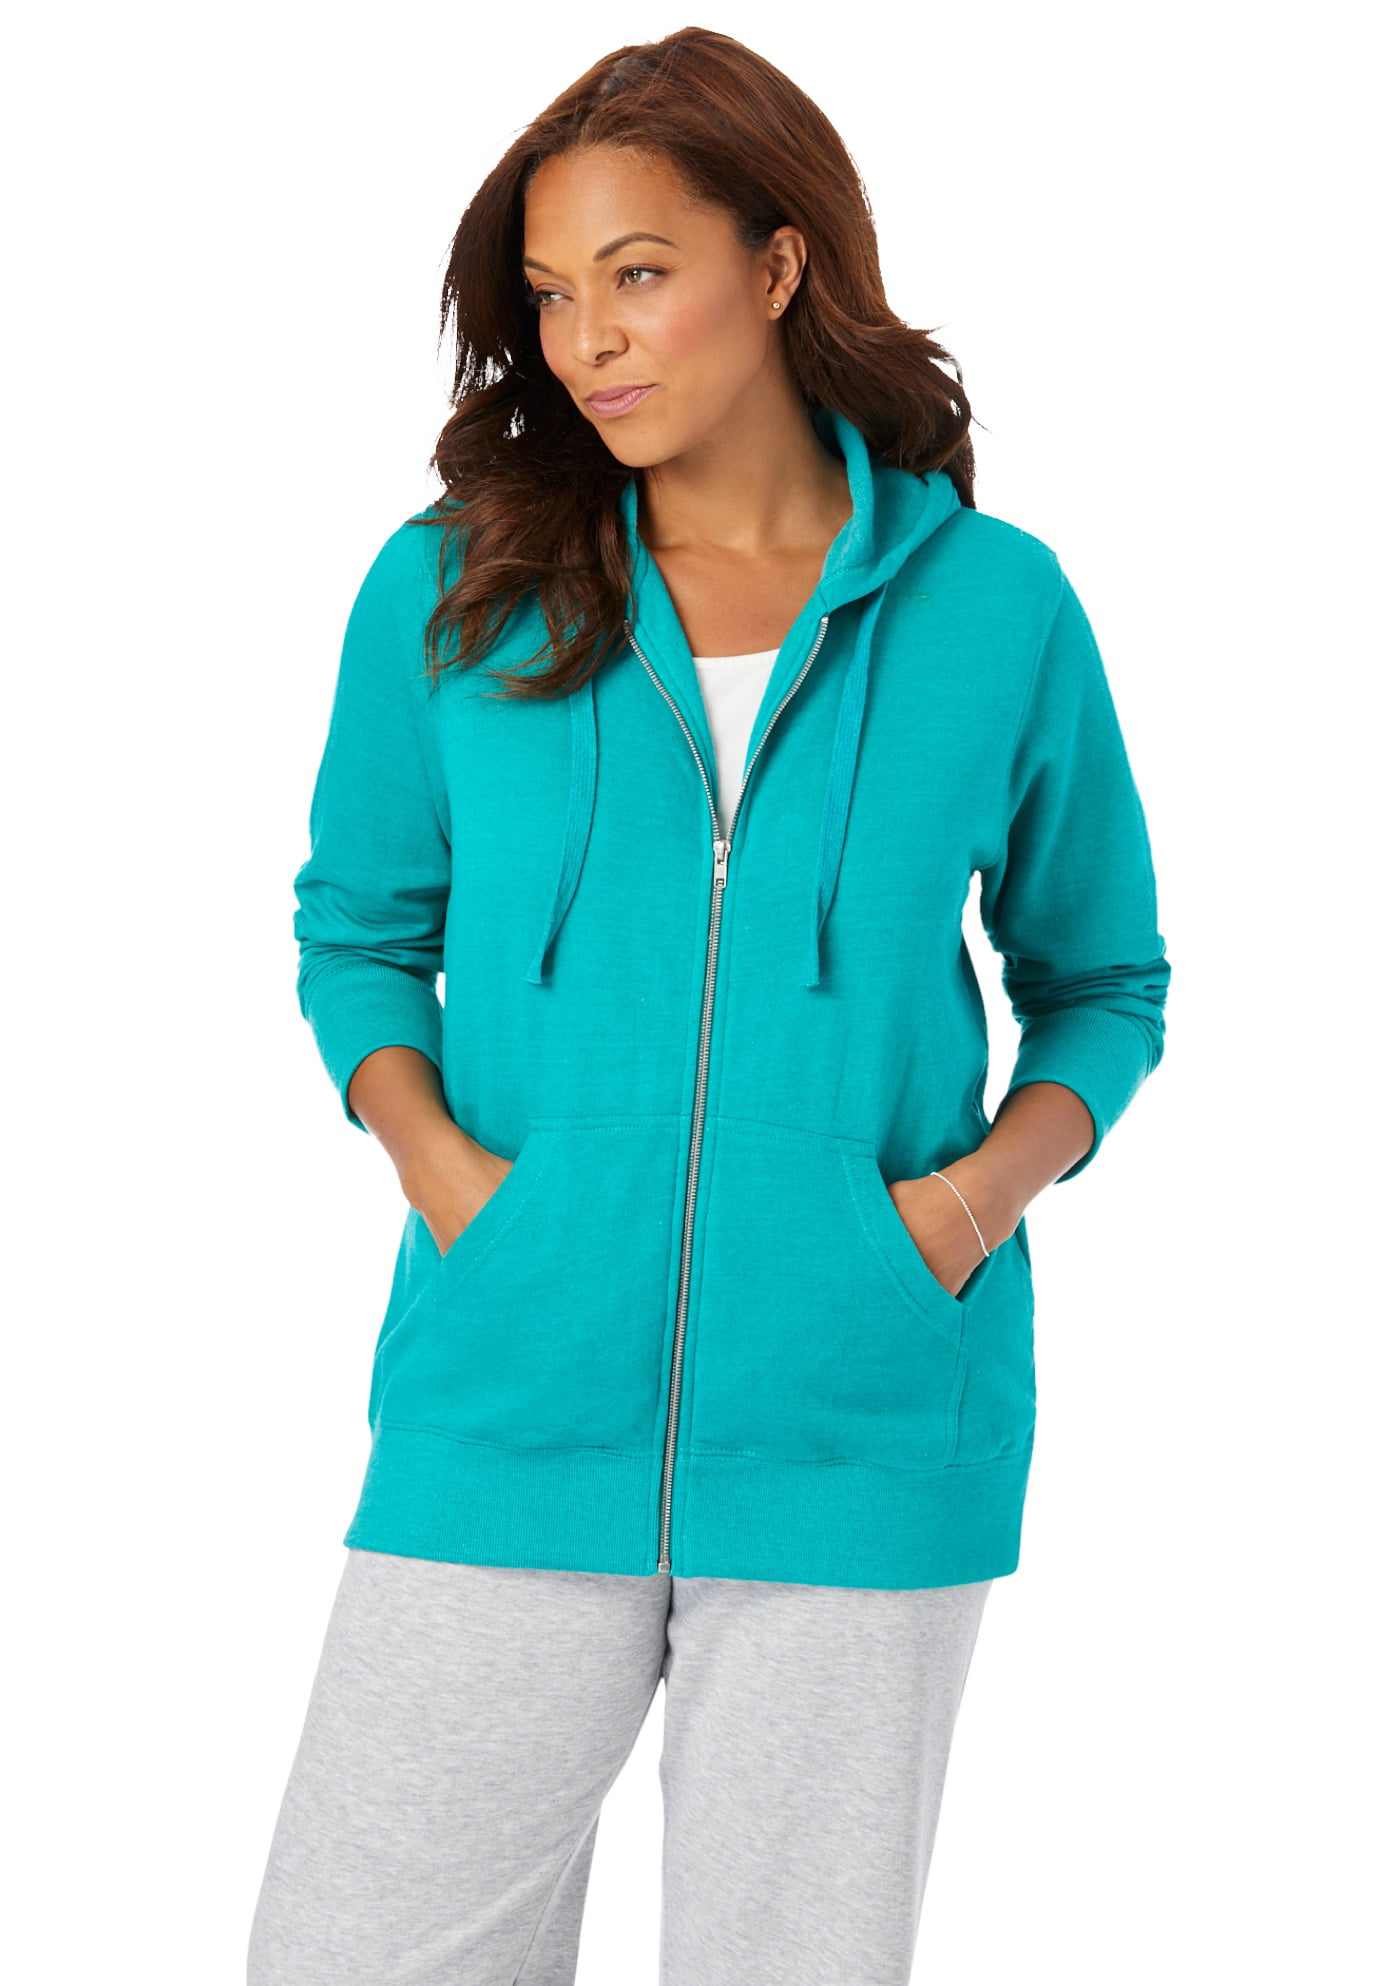 Woman Within - Woman Within Women's Plus Size Better Fleece Zip-Front ...